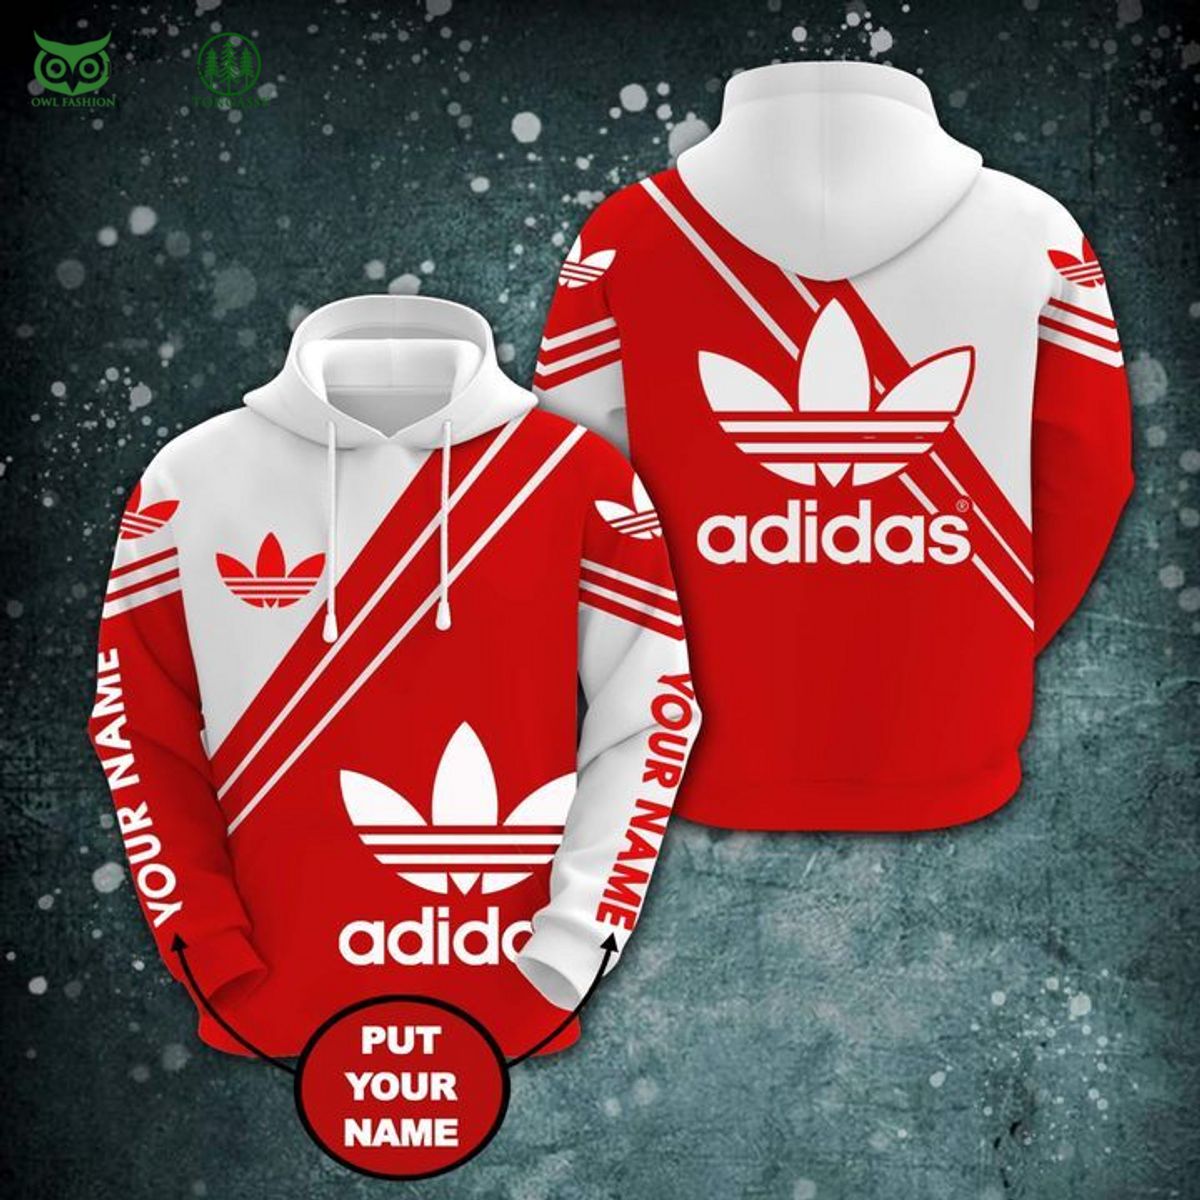 adidas famous sport brand red personalized hoodie and pants 2 xewR5